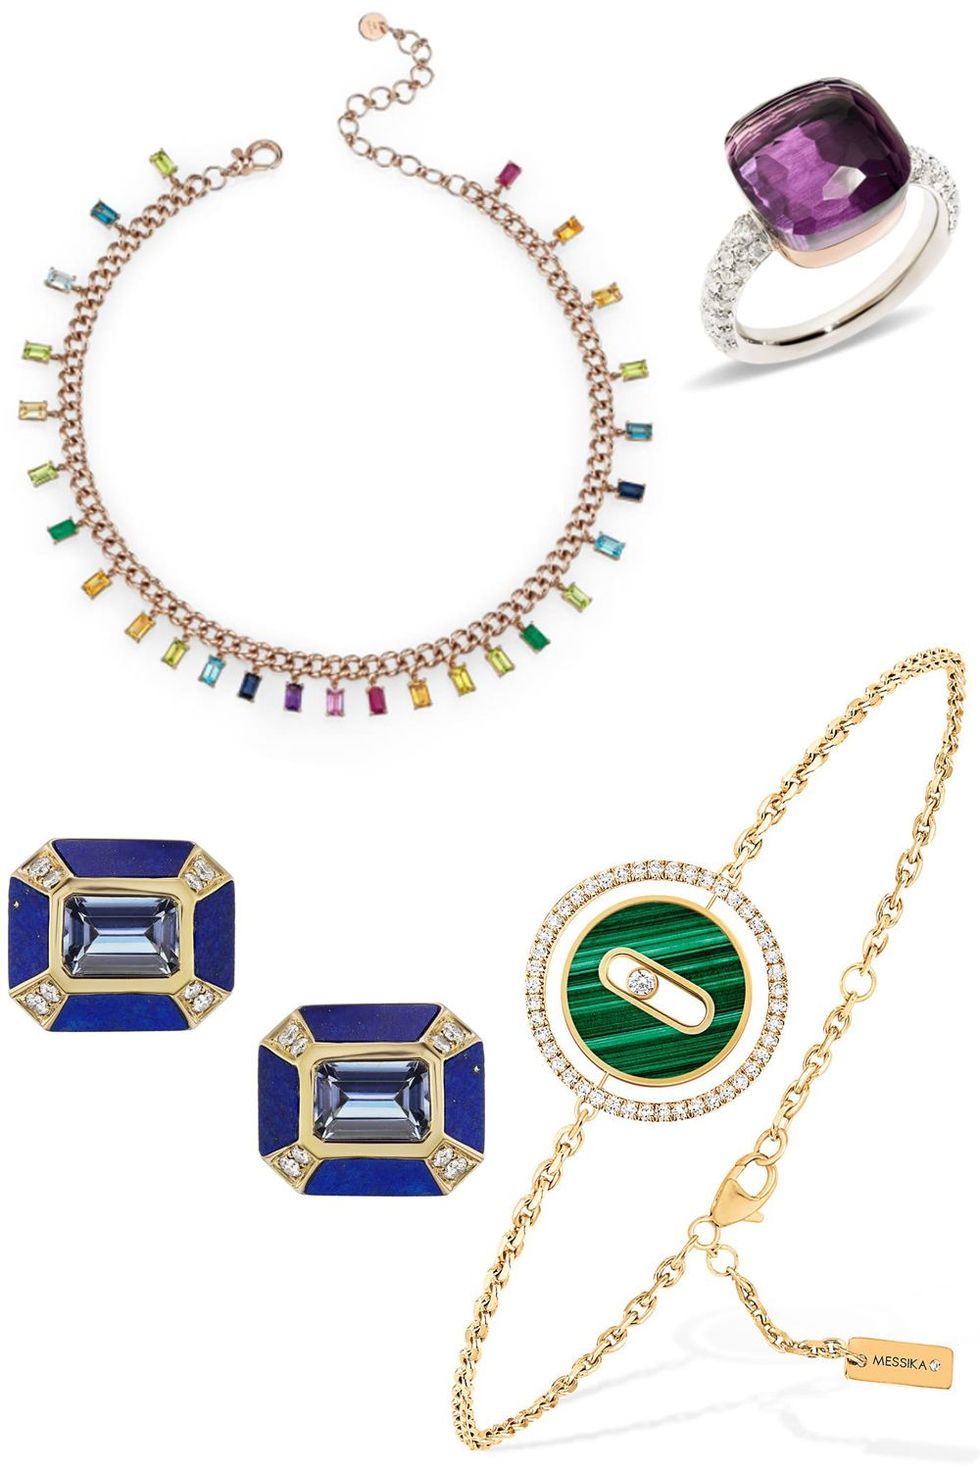 Our Favorite Fine Jewelry Releases of 2021! - Ace Jewelers Magazine